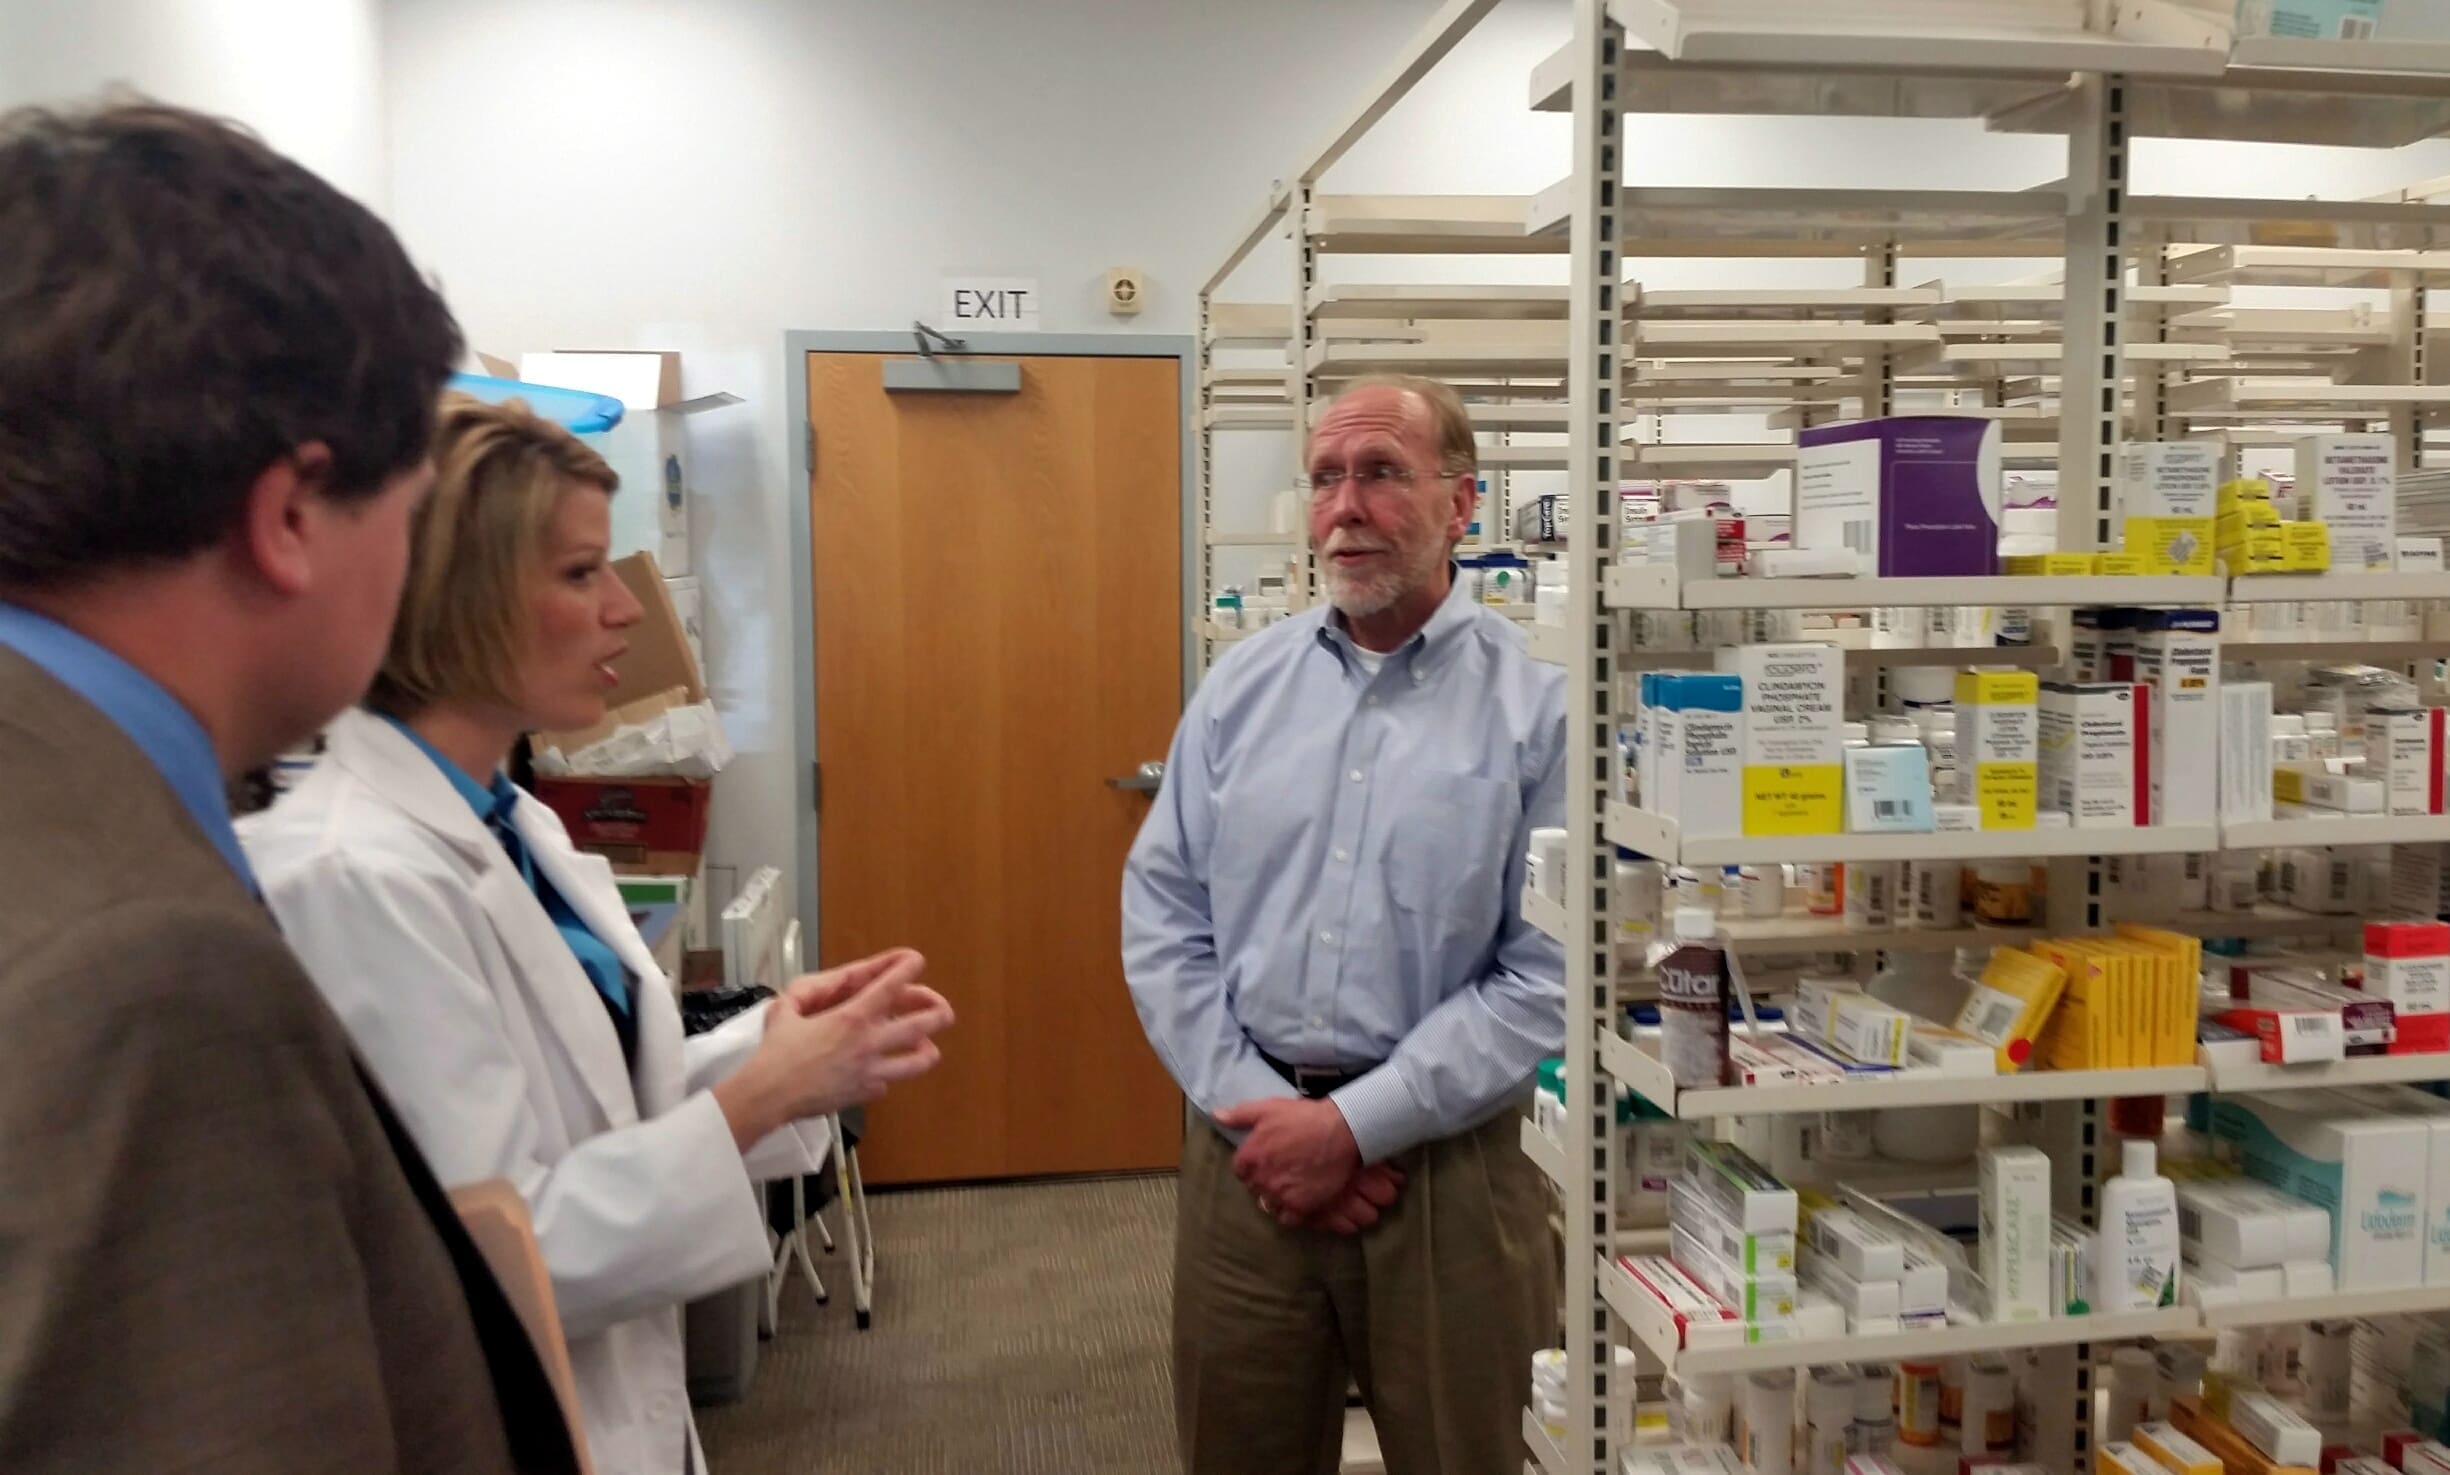 The pharmacy team at Hy-Vee in Davenport, Iowa, briefed Rep. Loebsack (D-IA) on key pharmacy issues, including immunizations, medication therapy management and provider status legislation, which would improve patient access to care. The team called the tour "terrific."